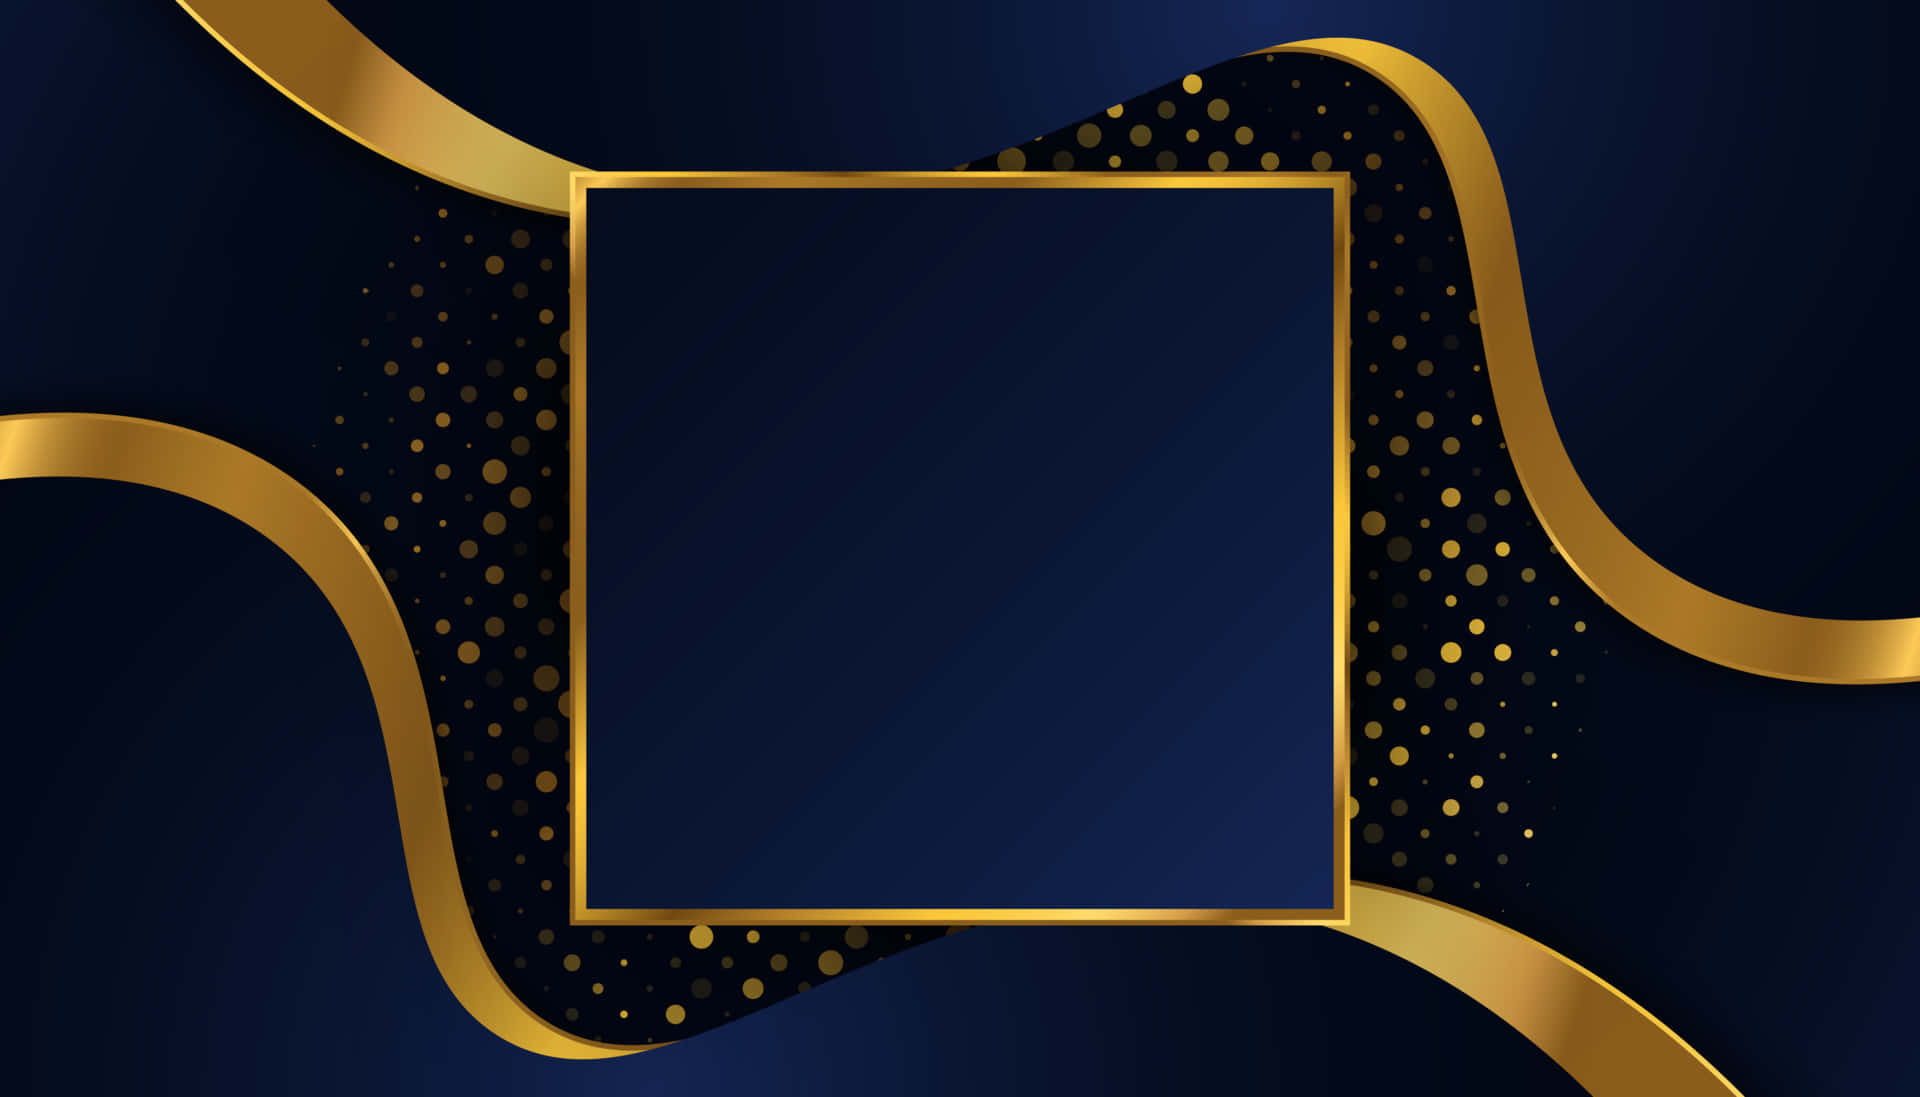 Vibrant Blue and Gold Patterned Background